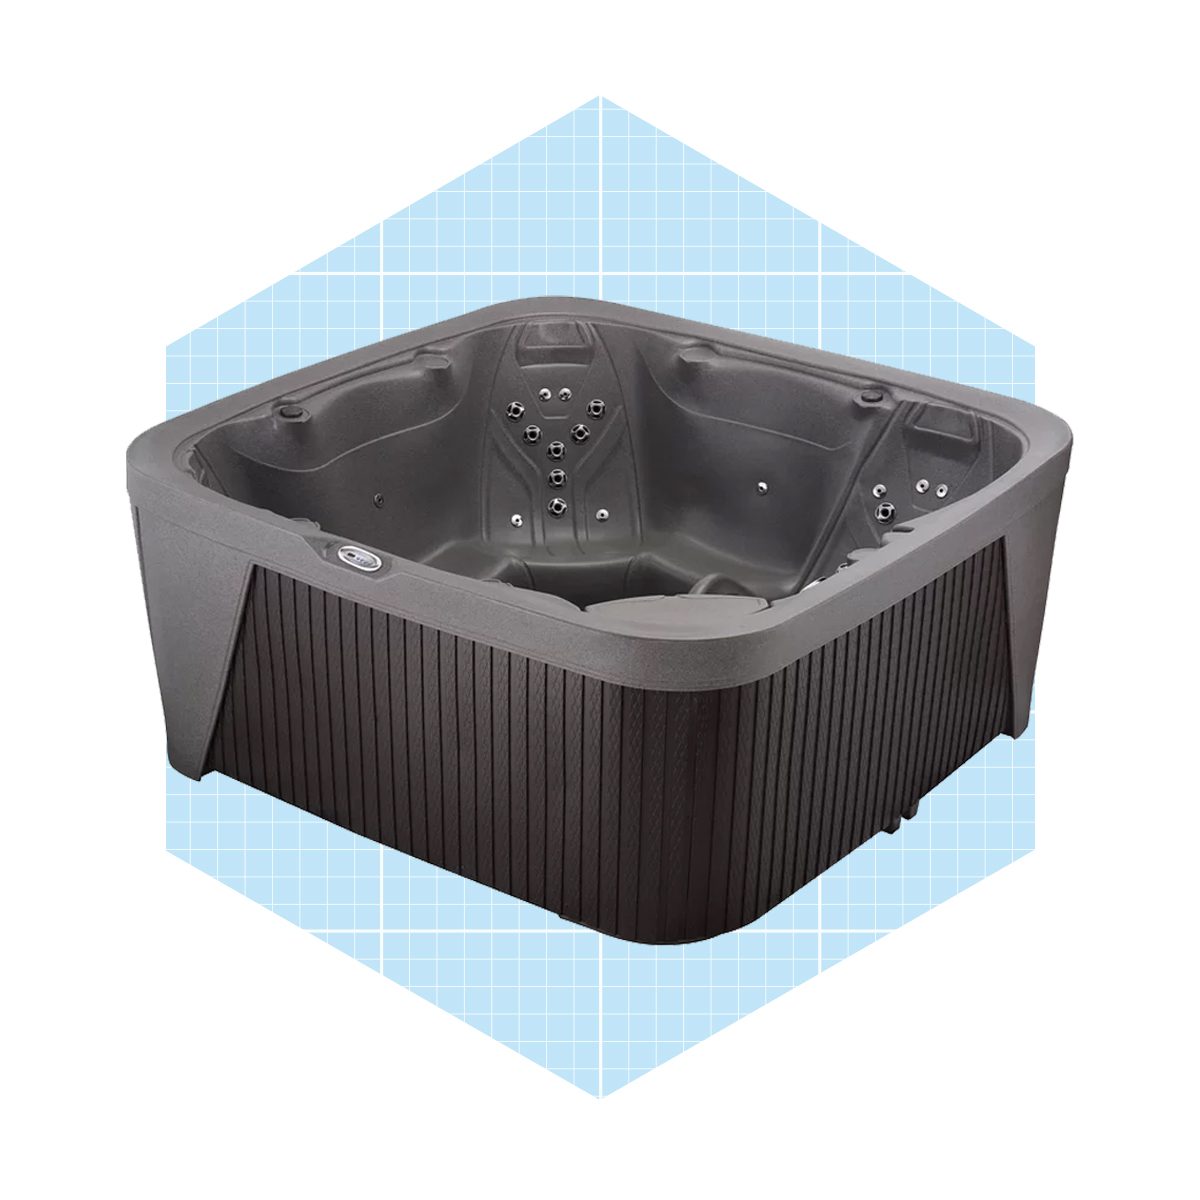 Aquarest Spas, Powered By Jacuzzi Pumps 6 Person 45 Jet Square Plug And Play Hot Tub With Ozonator Ecomm Wayfair.com